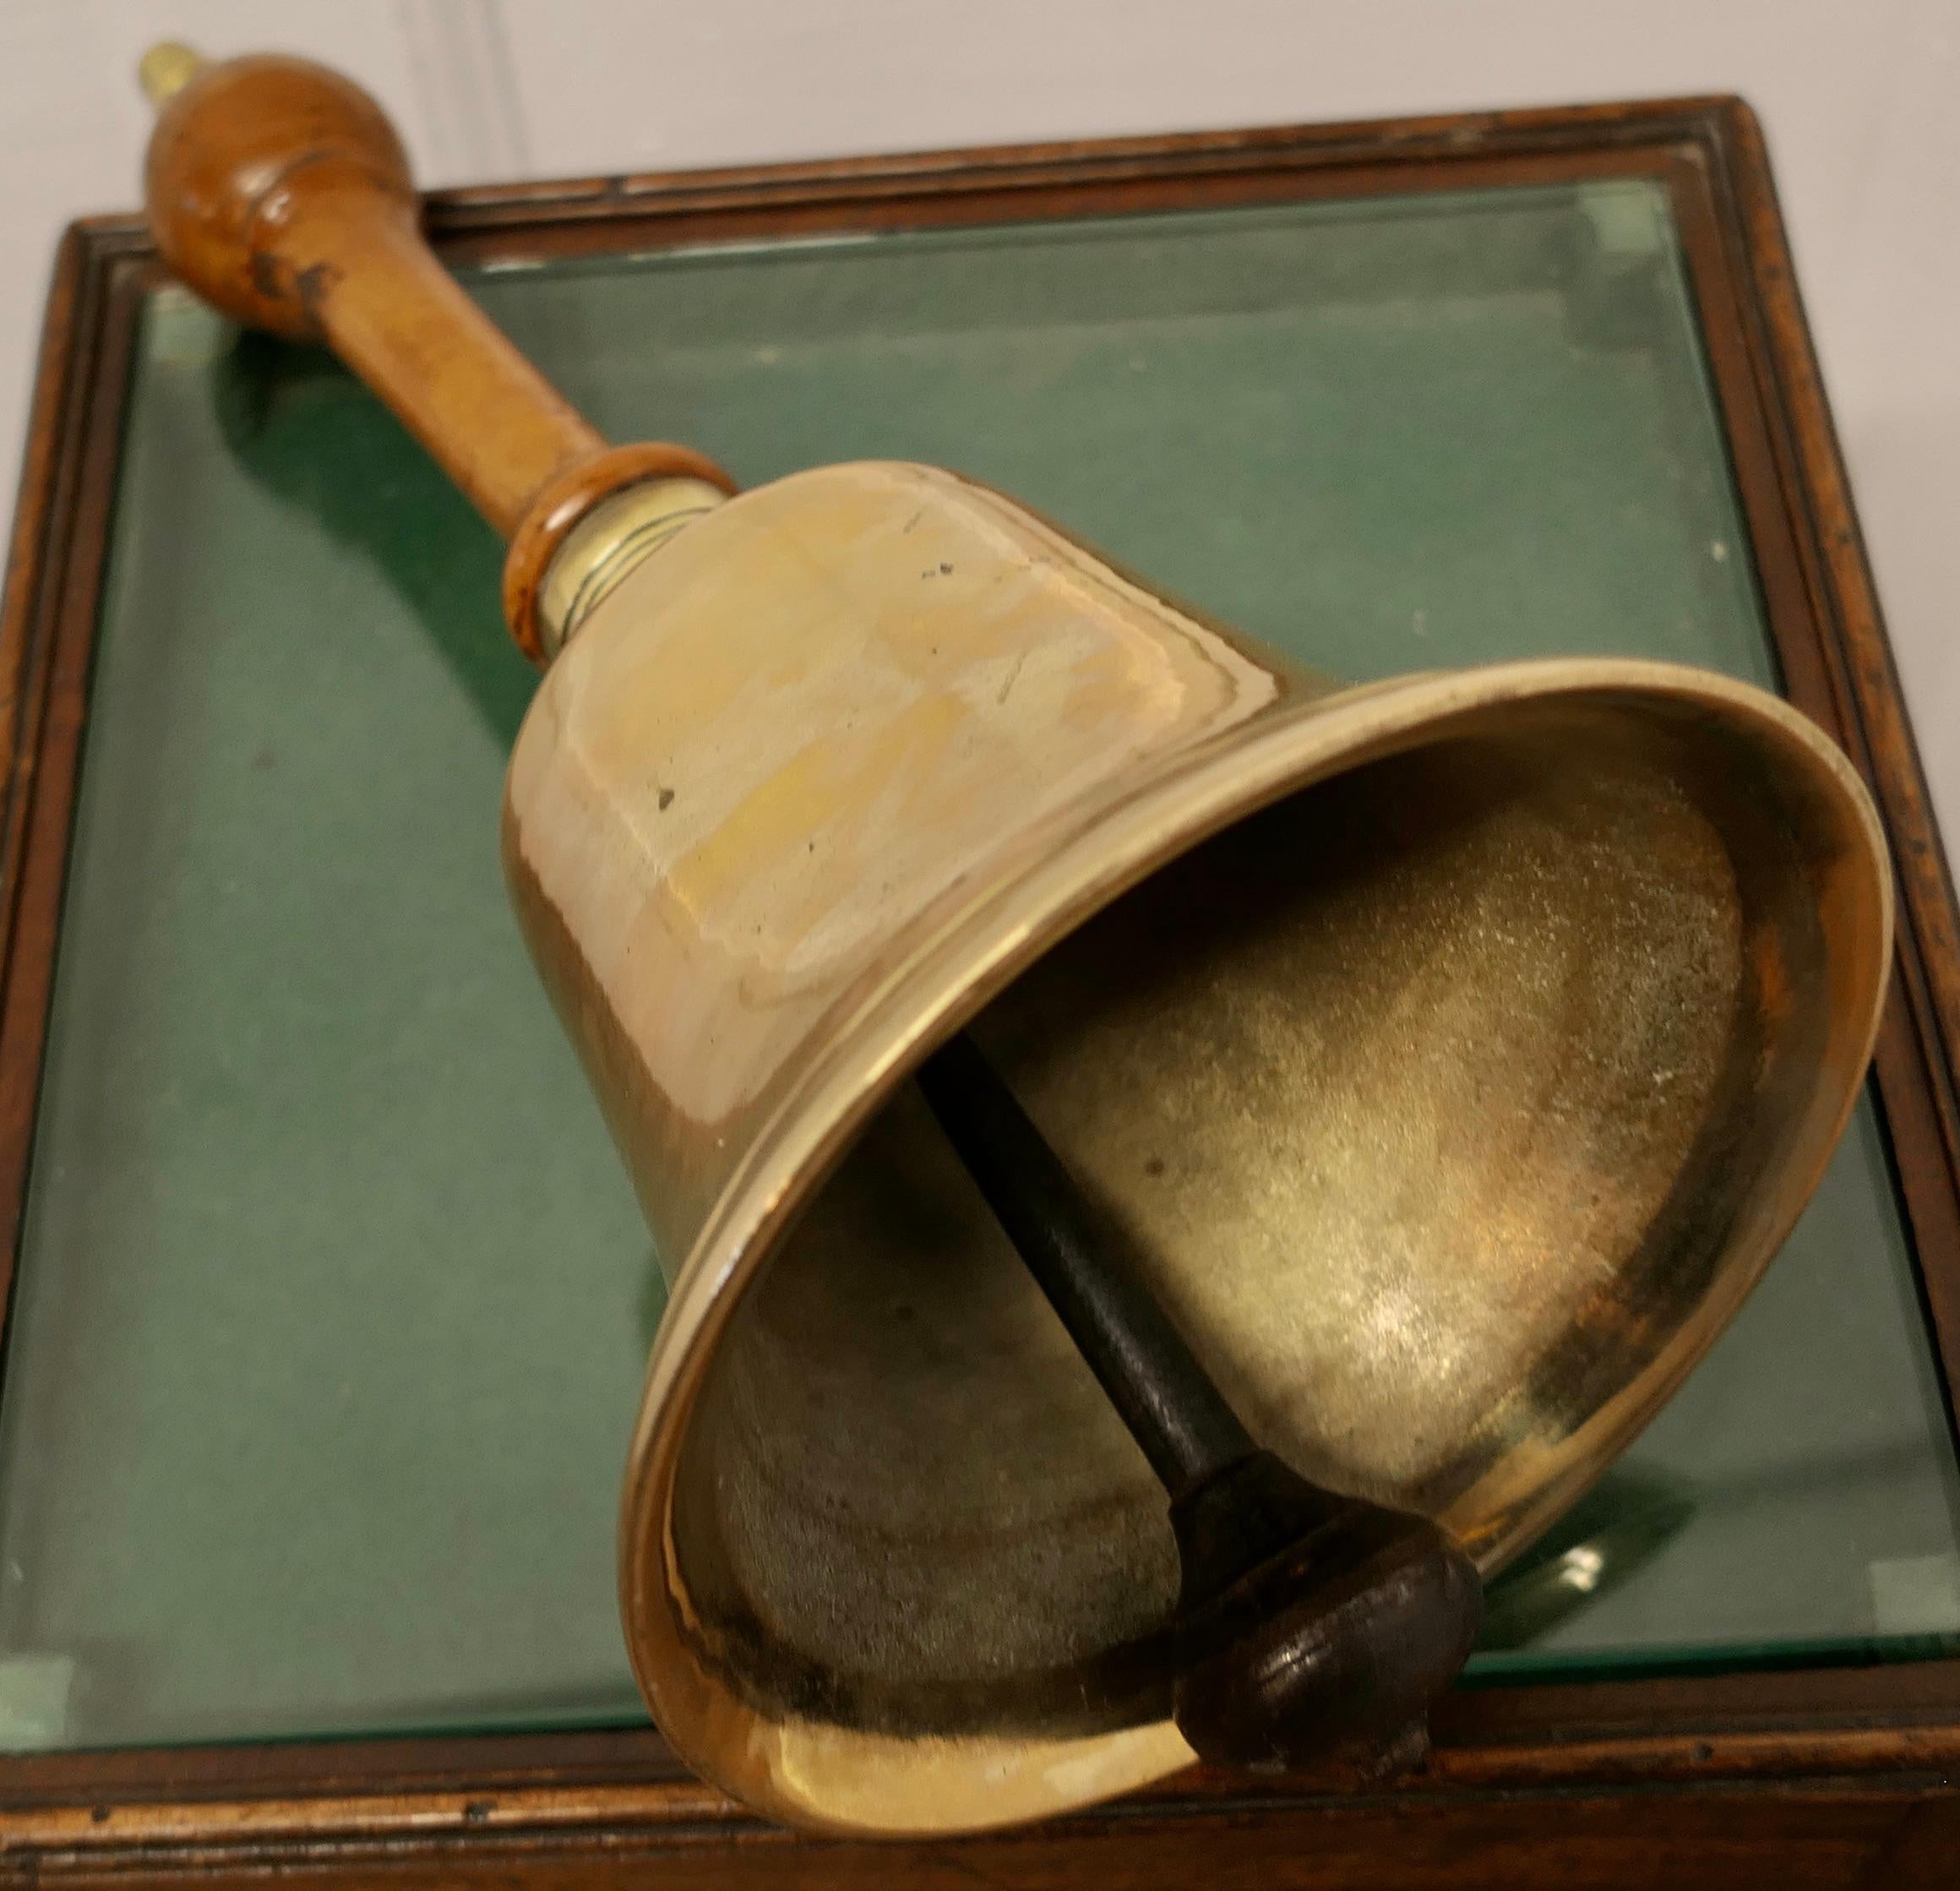 Old brass hand bell, town Cryer’s or School Bell.

A Great piece larger and heavier than most, the bell is made in solid brass and has a beautiful sycamore turned handle with a brass acorn on the top
The bell is 14” high, and 7” in